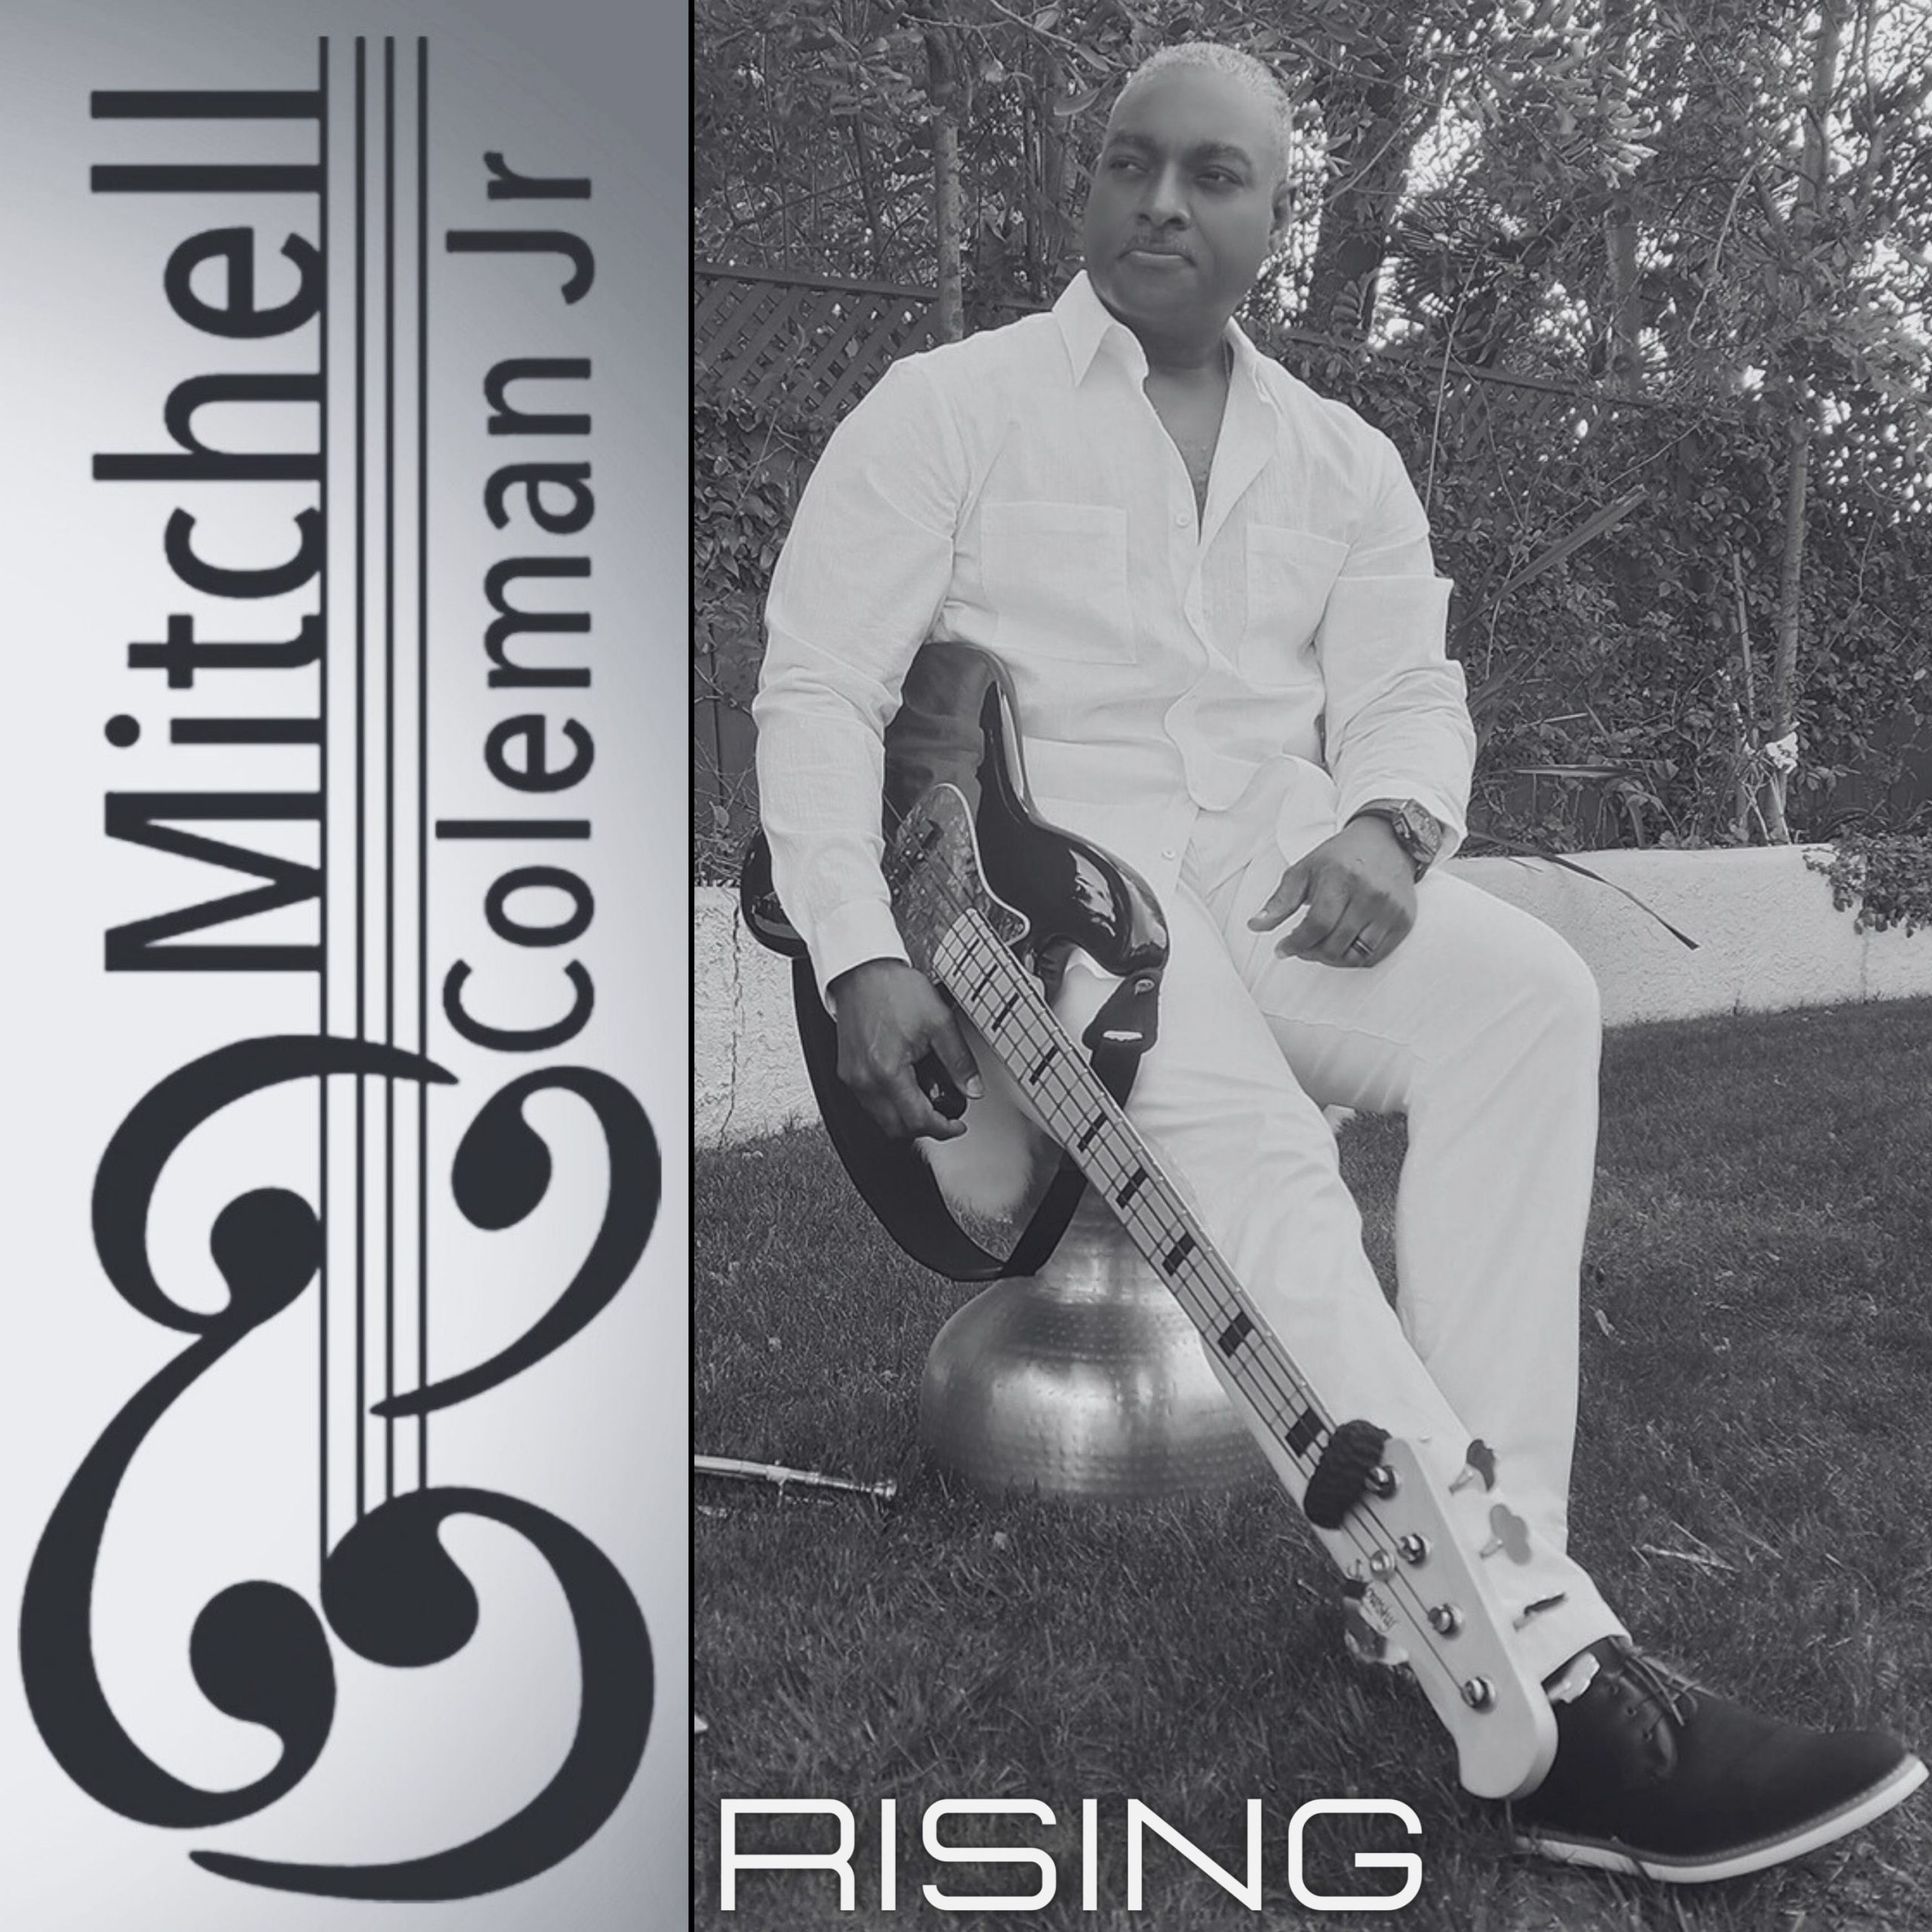 MITCHELL COLEMAN JR. – RISING – CD COVER